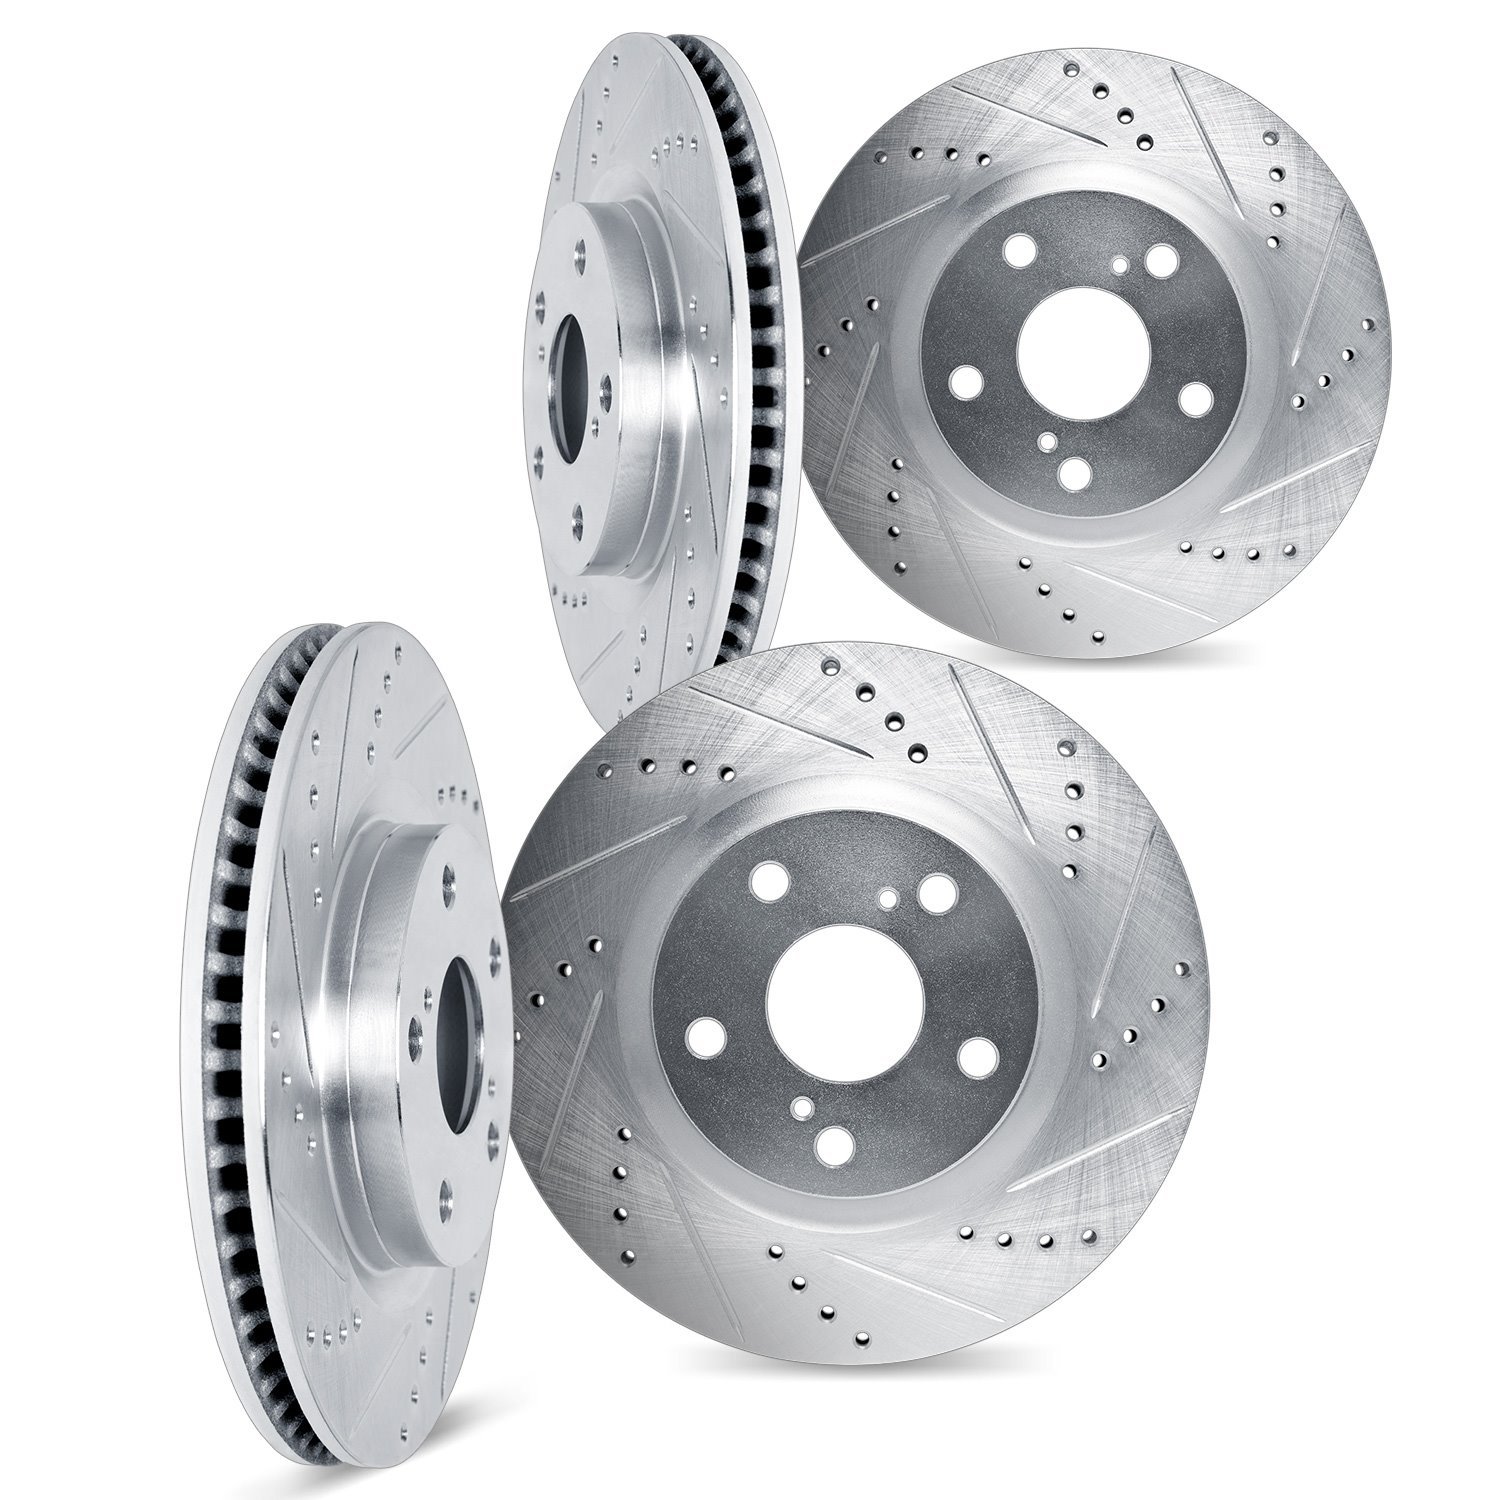 7004-42006 Drilled/Slotted Brake Rotors [Silver], Fits Select Mopar, Position: Front and Rear